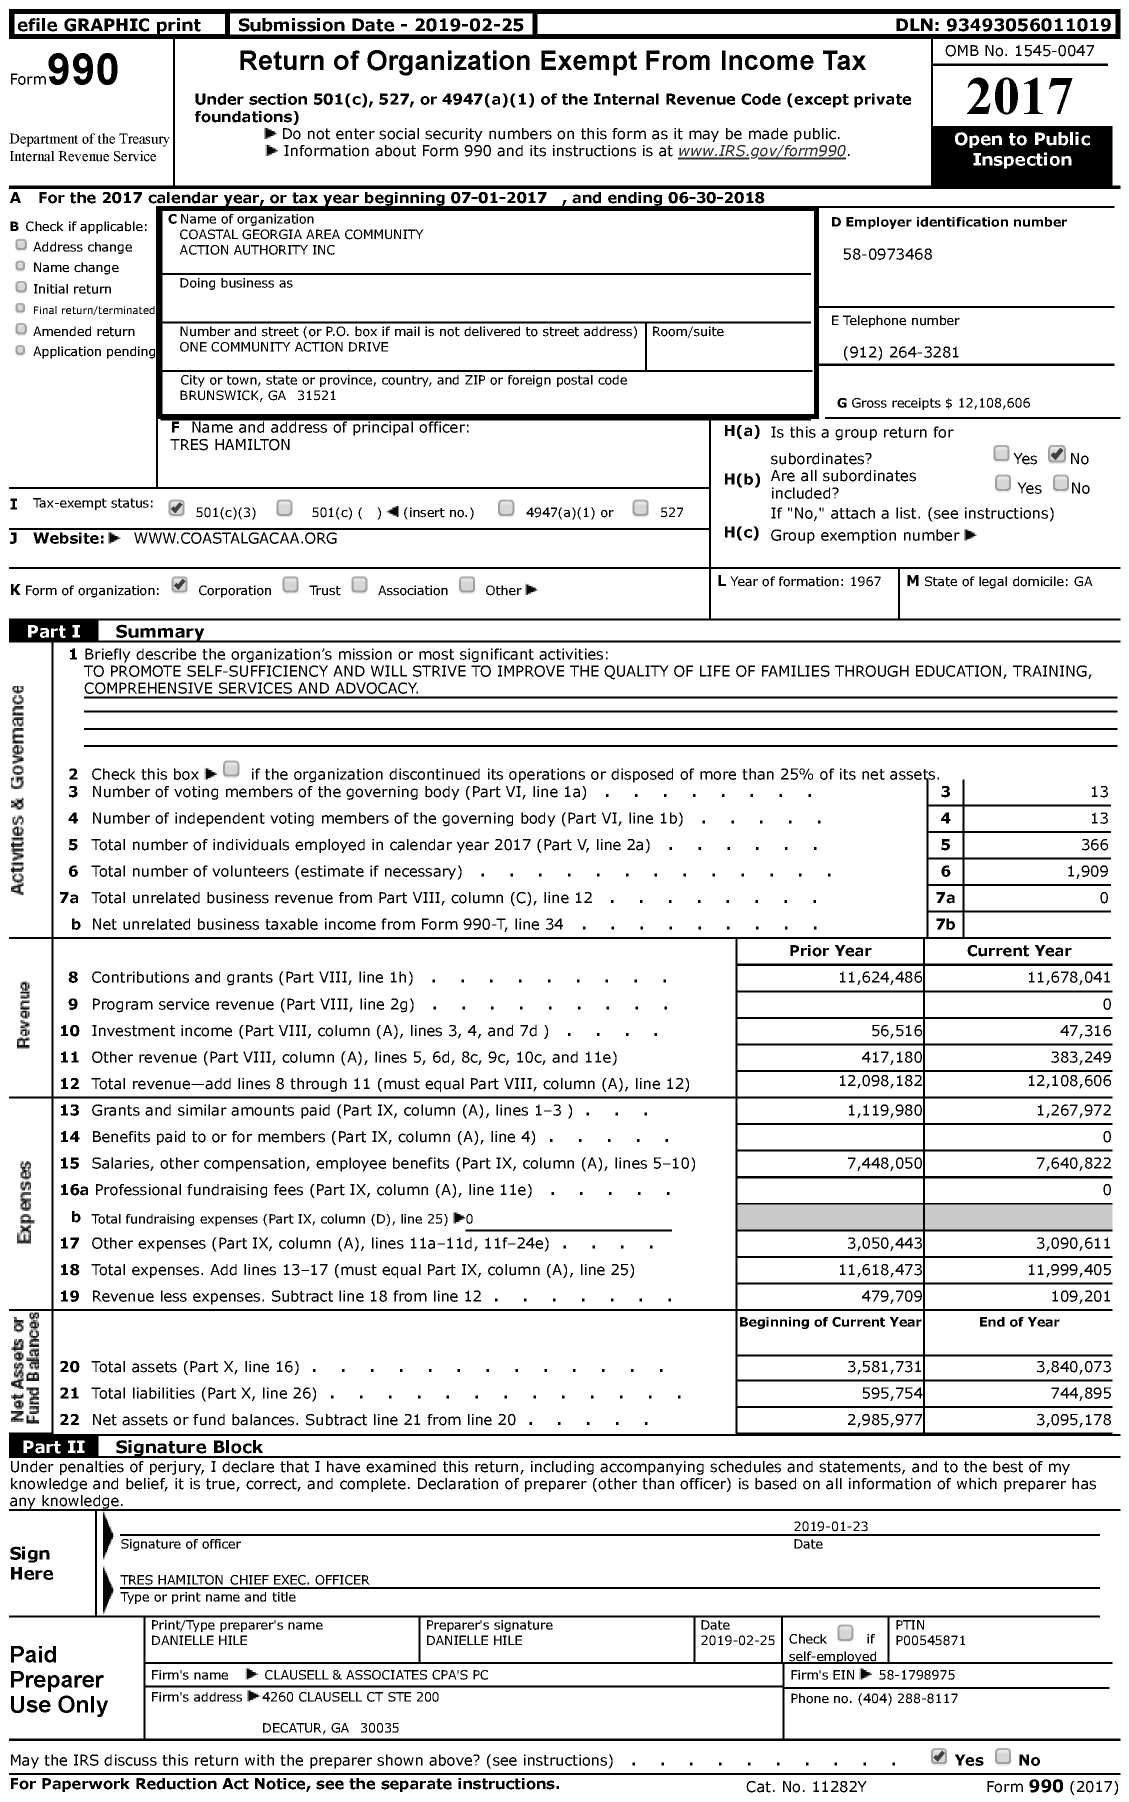 Image of first page of 2017 Form 990 for Coastal Georgia Area Community Action Authority